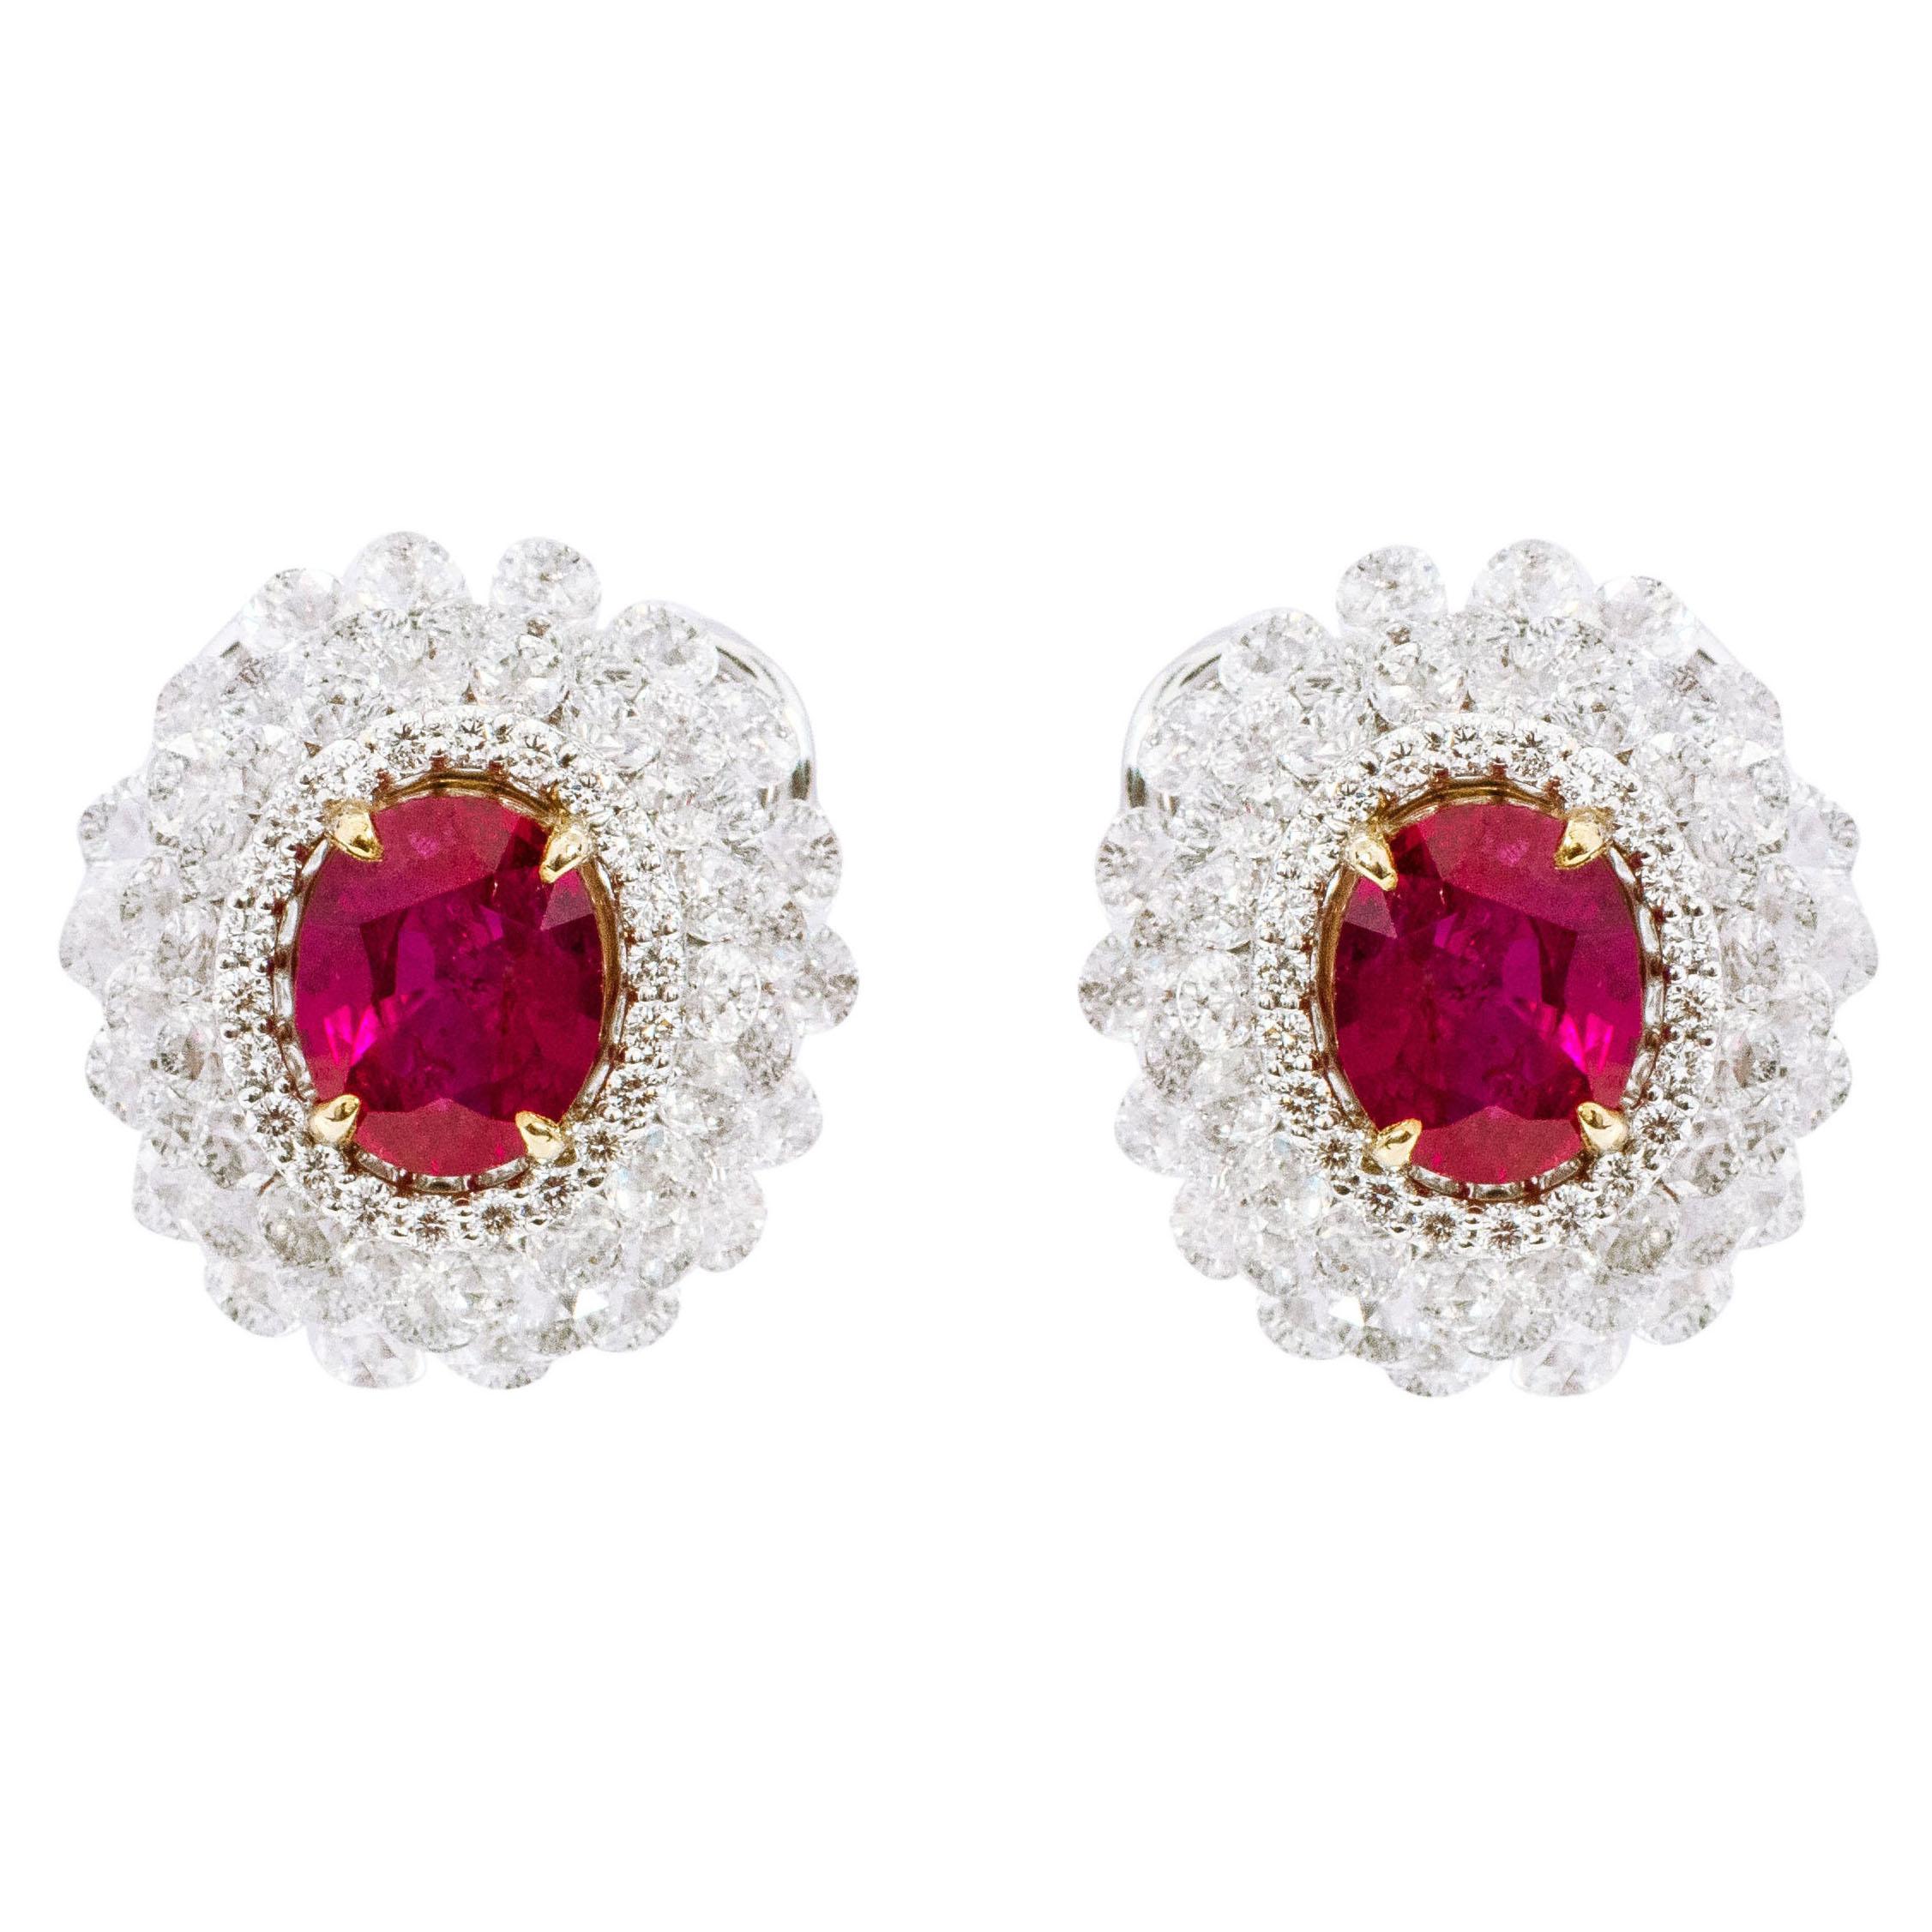 18 Karat White Gold 6.27 Carats Ruby and Diamond Cluster Stud Earrings